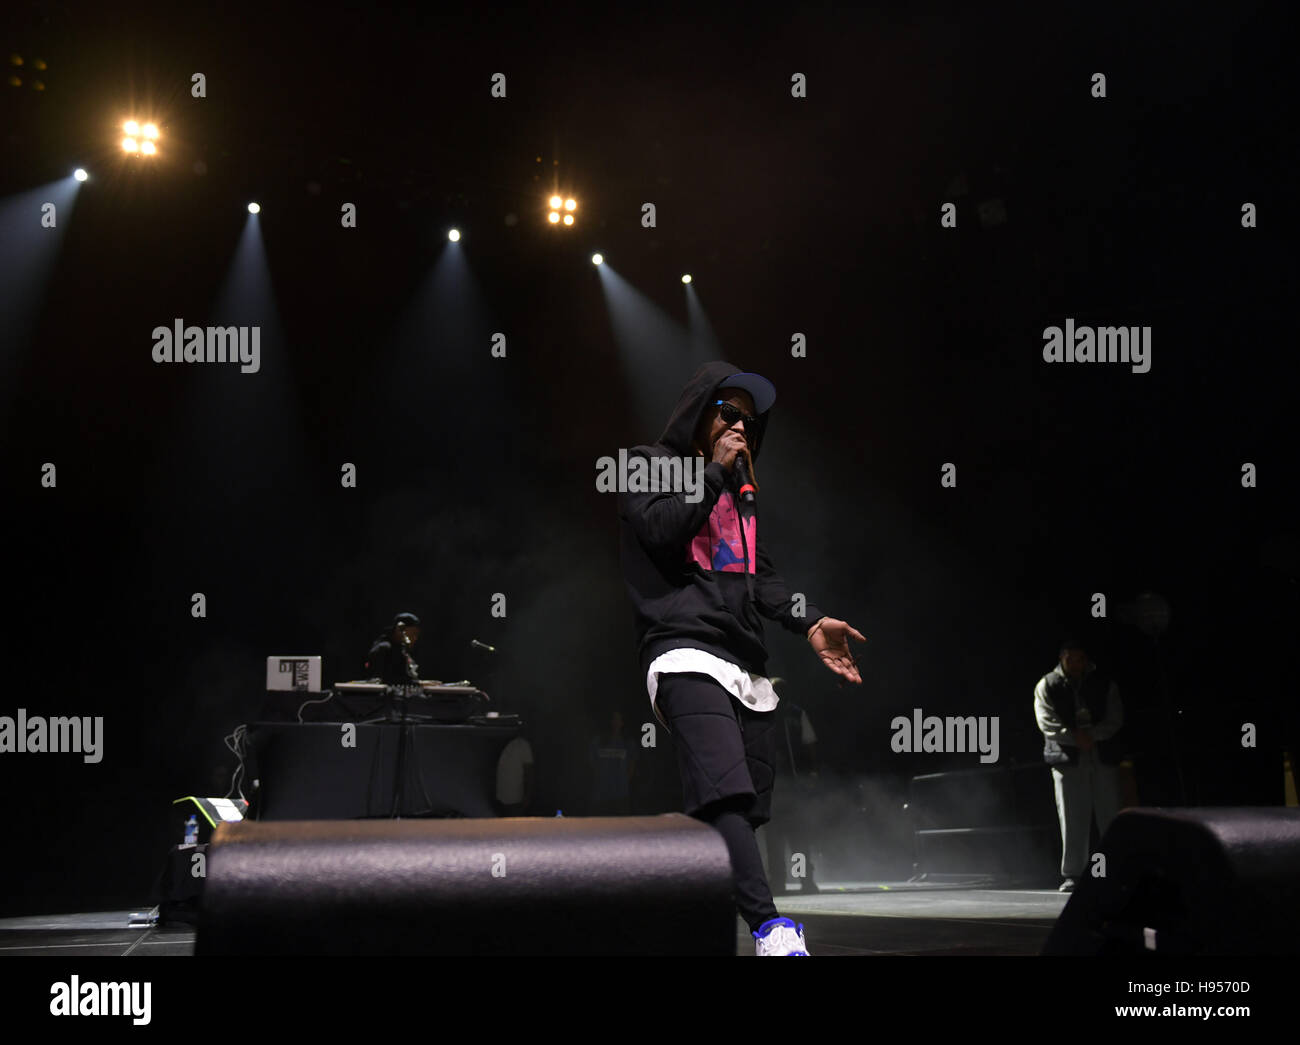 Norfolk, VIRGINIA, USA. 17th Nov, 2016. LIL WAYNE, grammy winner brings the rap to the CONSTANT CENTER at OLD DOMINION UNIVERSITY in NORFOLK, VIRGINIA on 17 OCTOBERL 2016. © Jeff Moore/ZUMA Wire/Alamy Live News Stock Photo